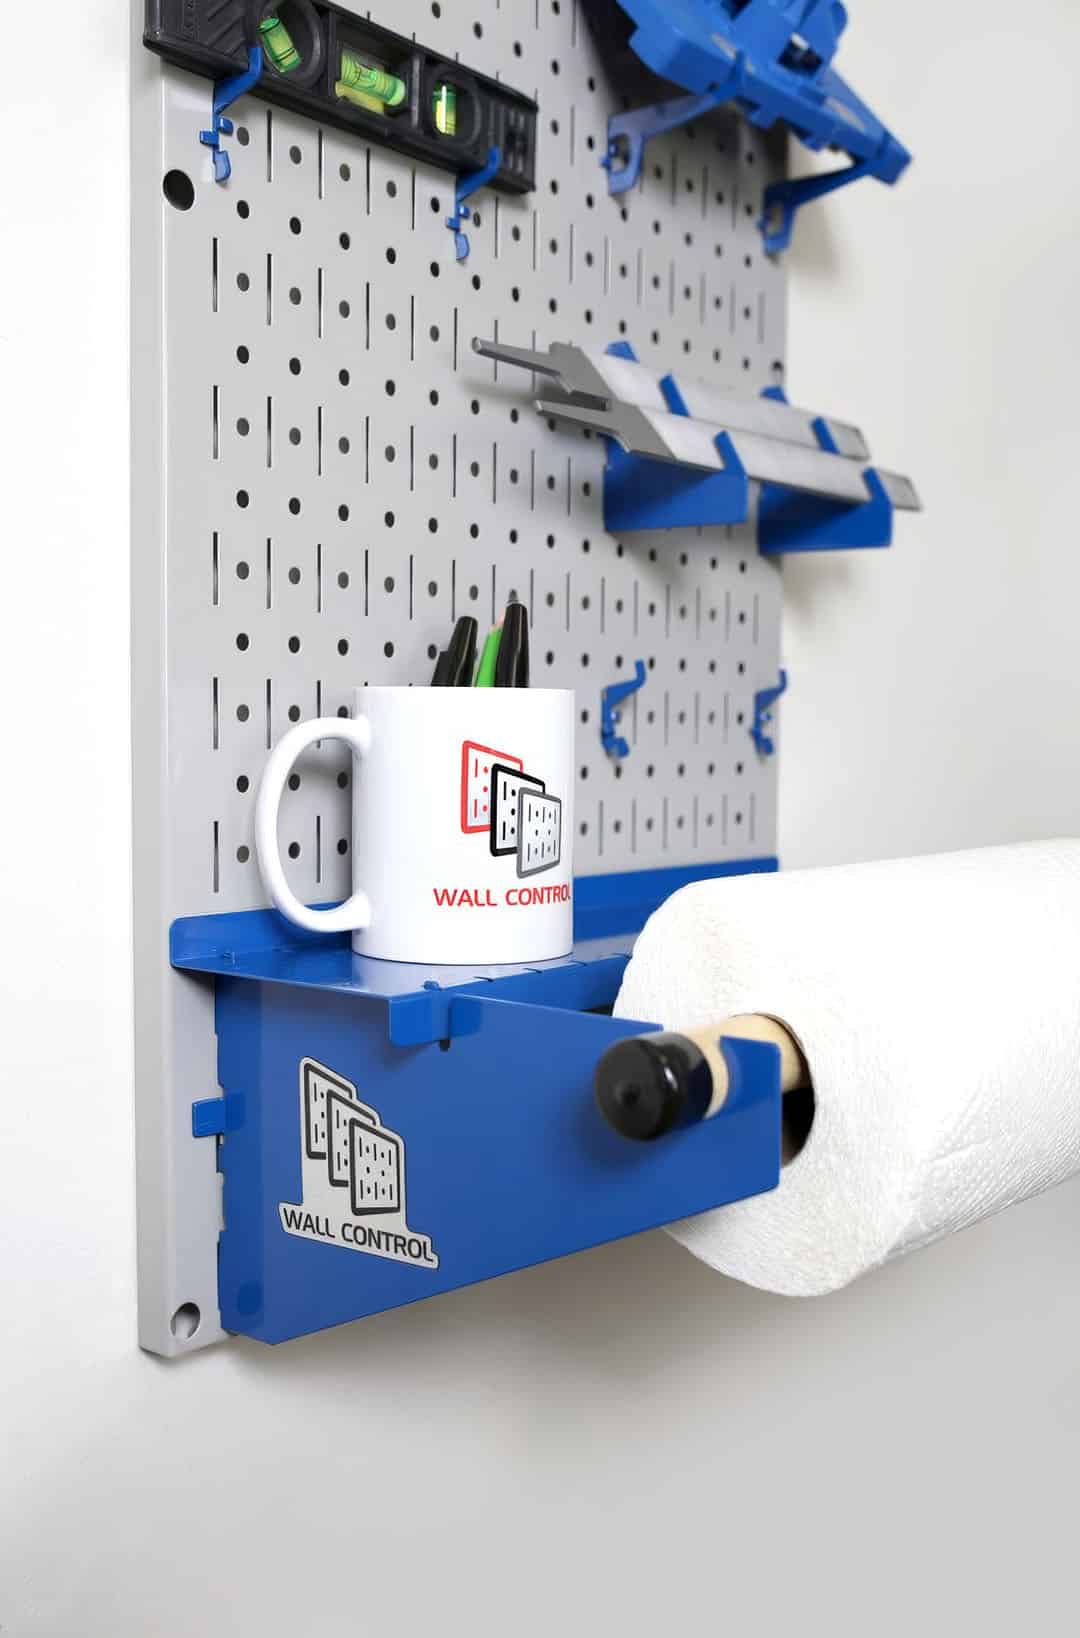 Wall Control paper towel holder